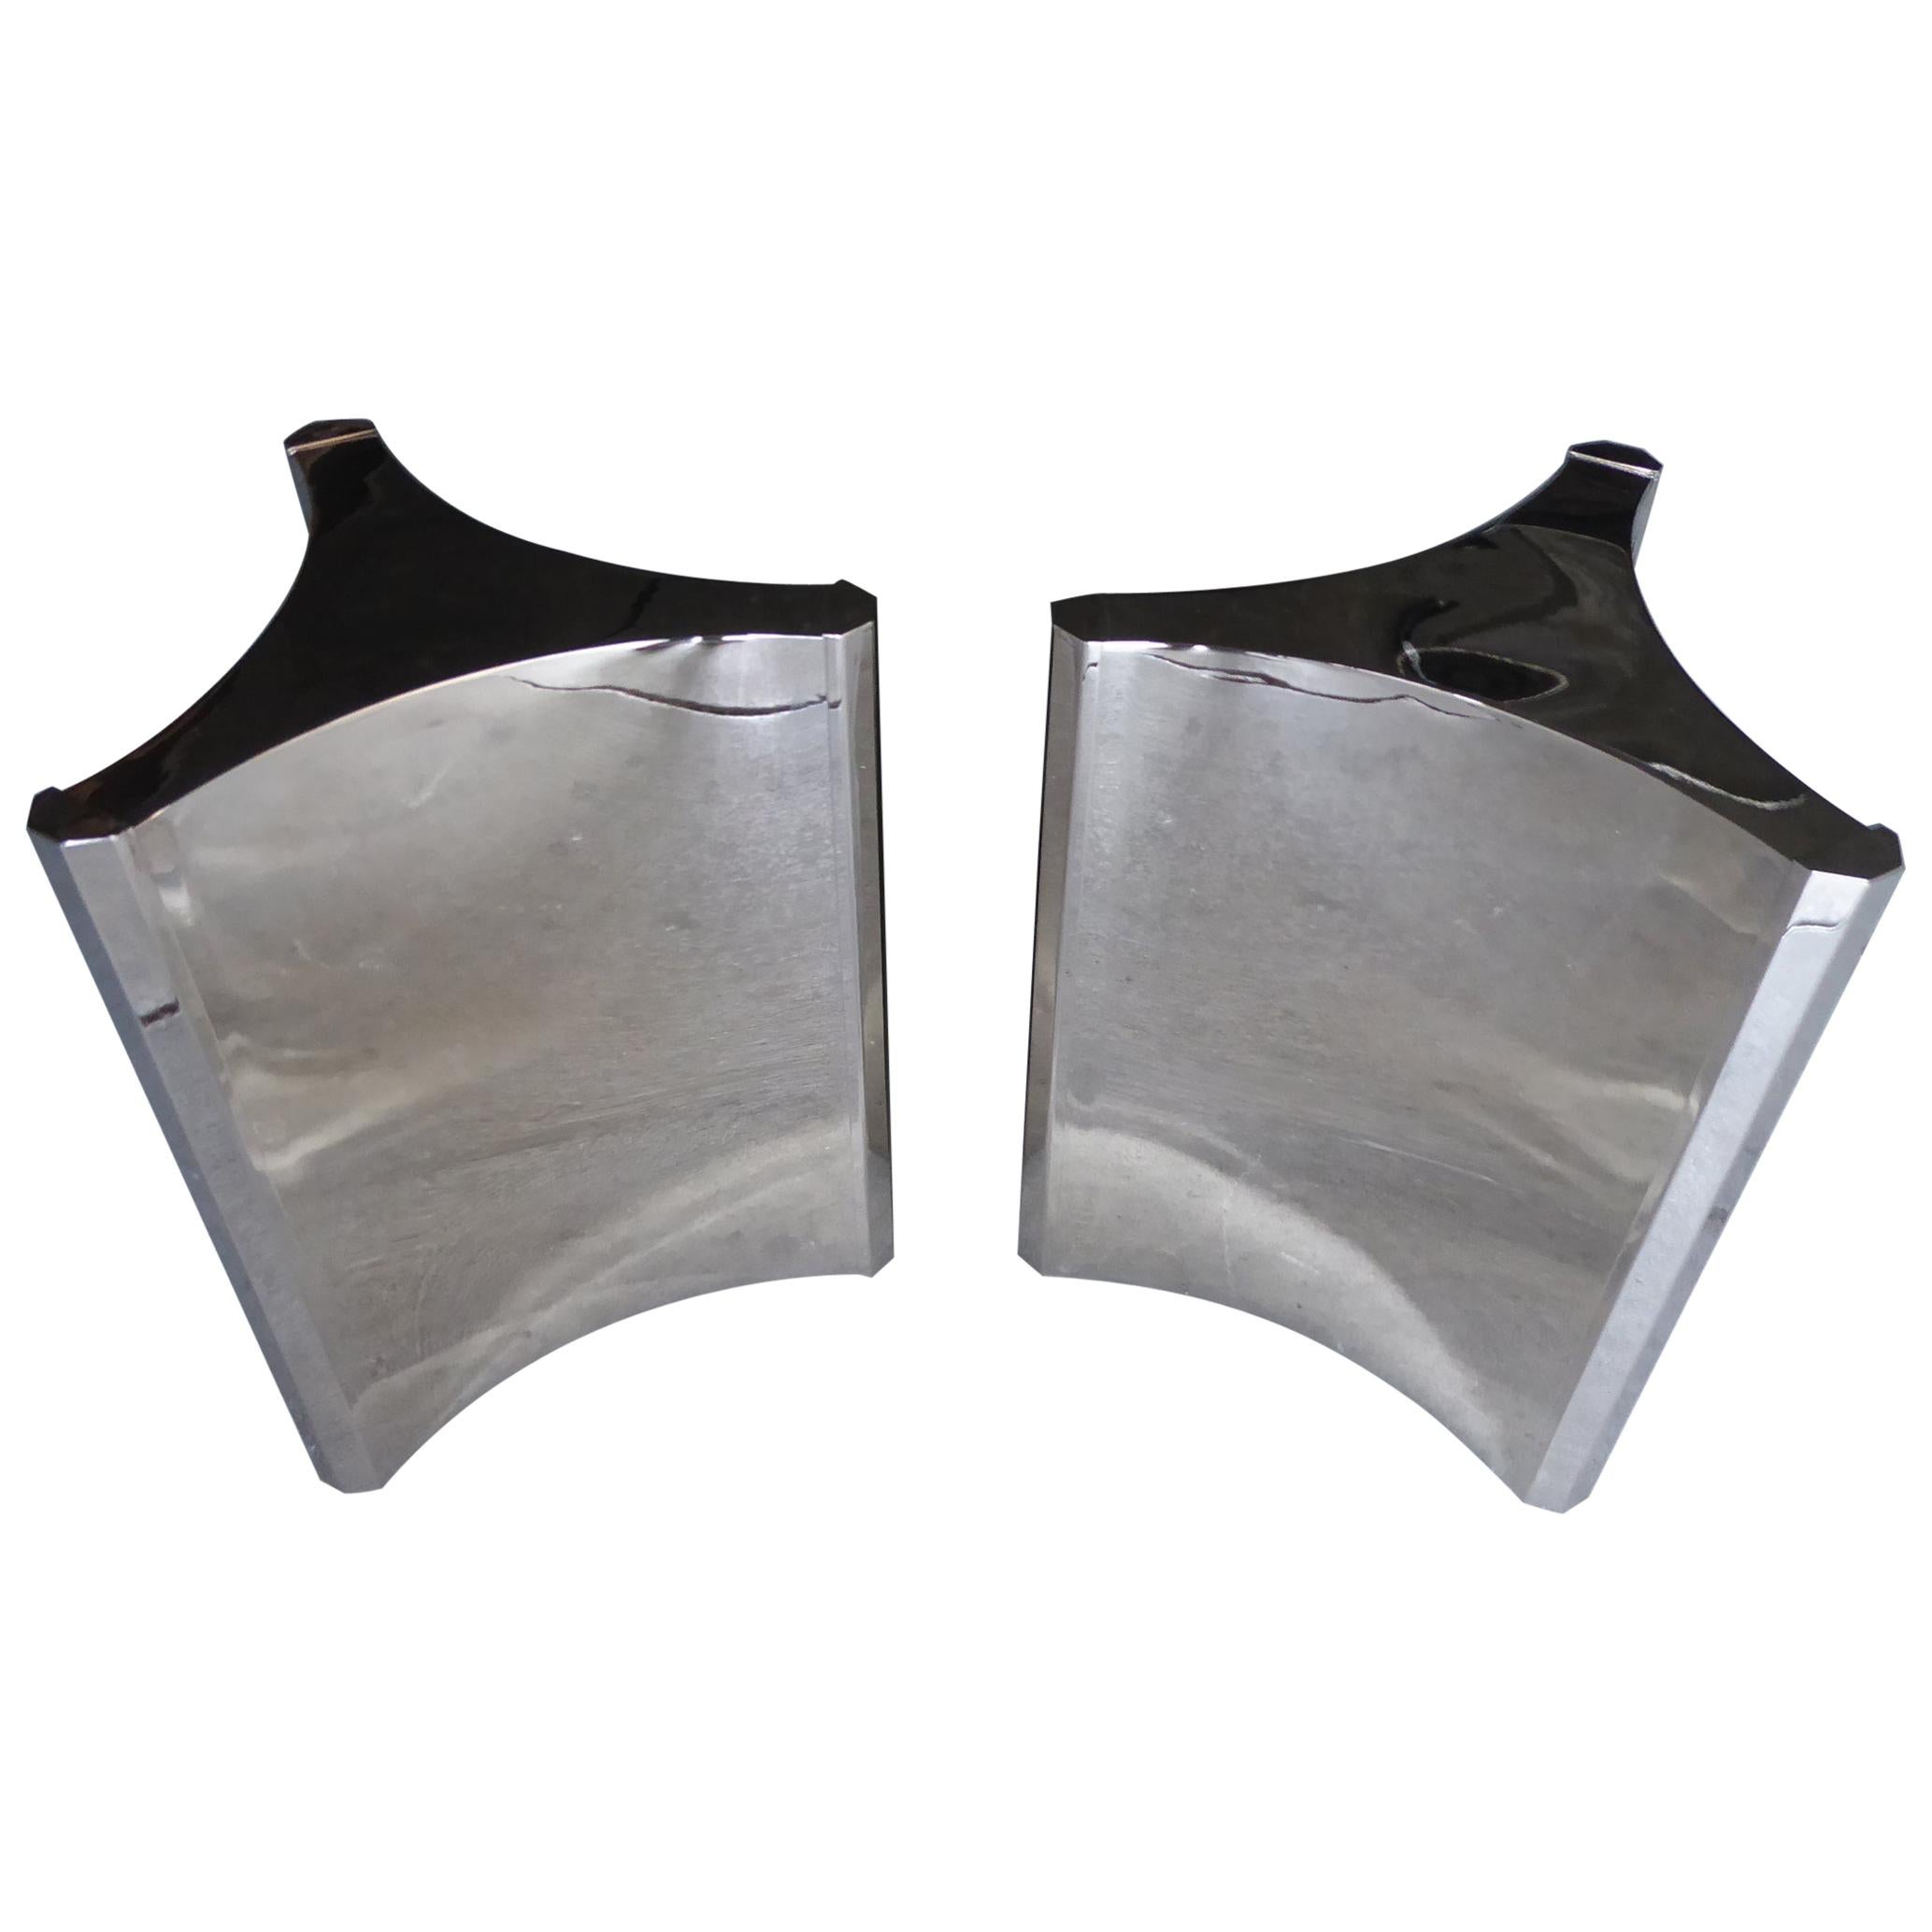 Pair of Nickel-Plated Steel Trilobi Table Bases Made by Mastercraft For Sale